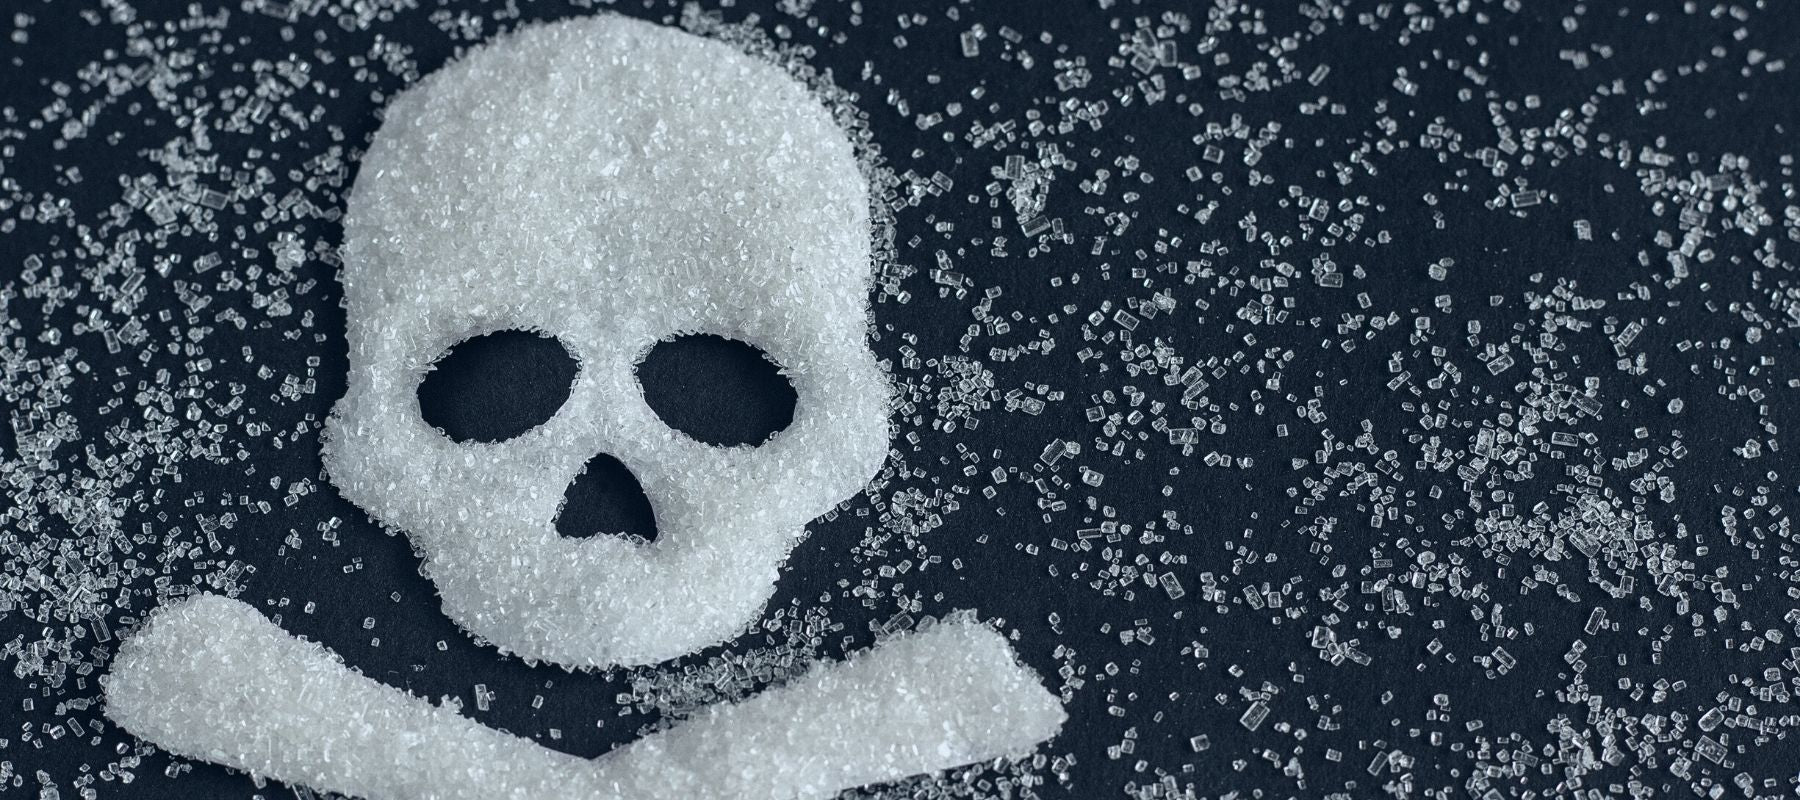 Refined Sugar Displayed in the Shape of a Skull and Crossbones